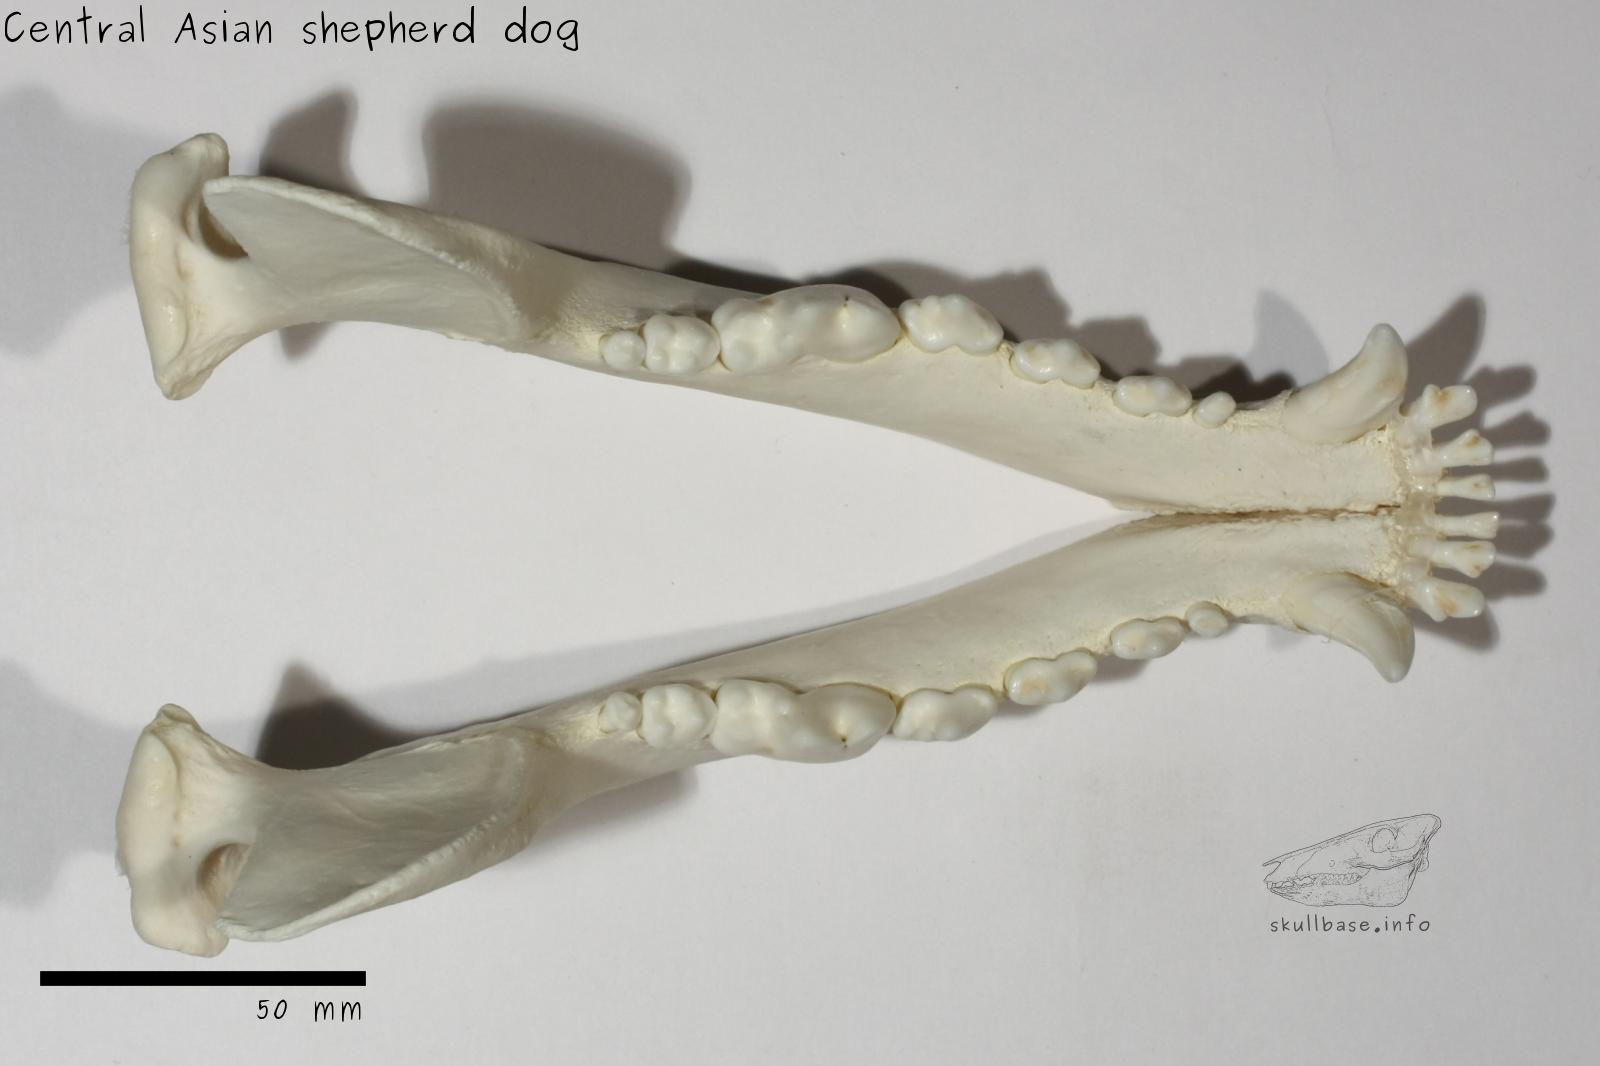 Central Asian shepherd dog (Canis lupus familiaris) jaw